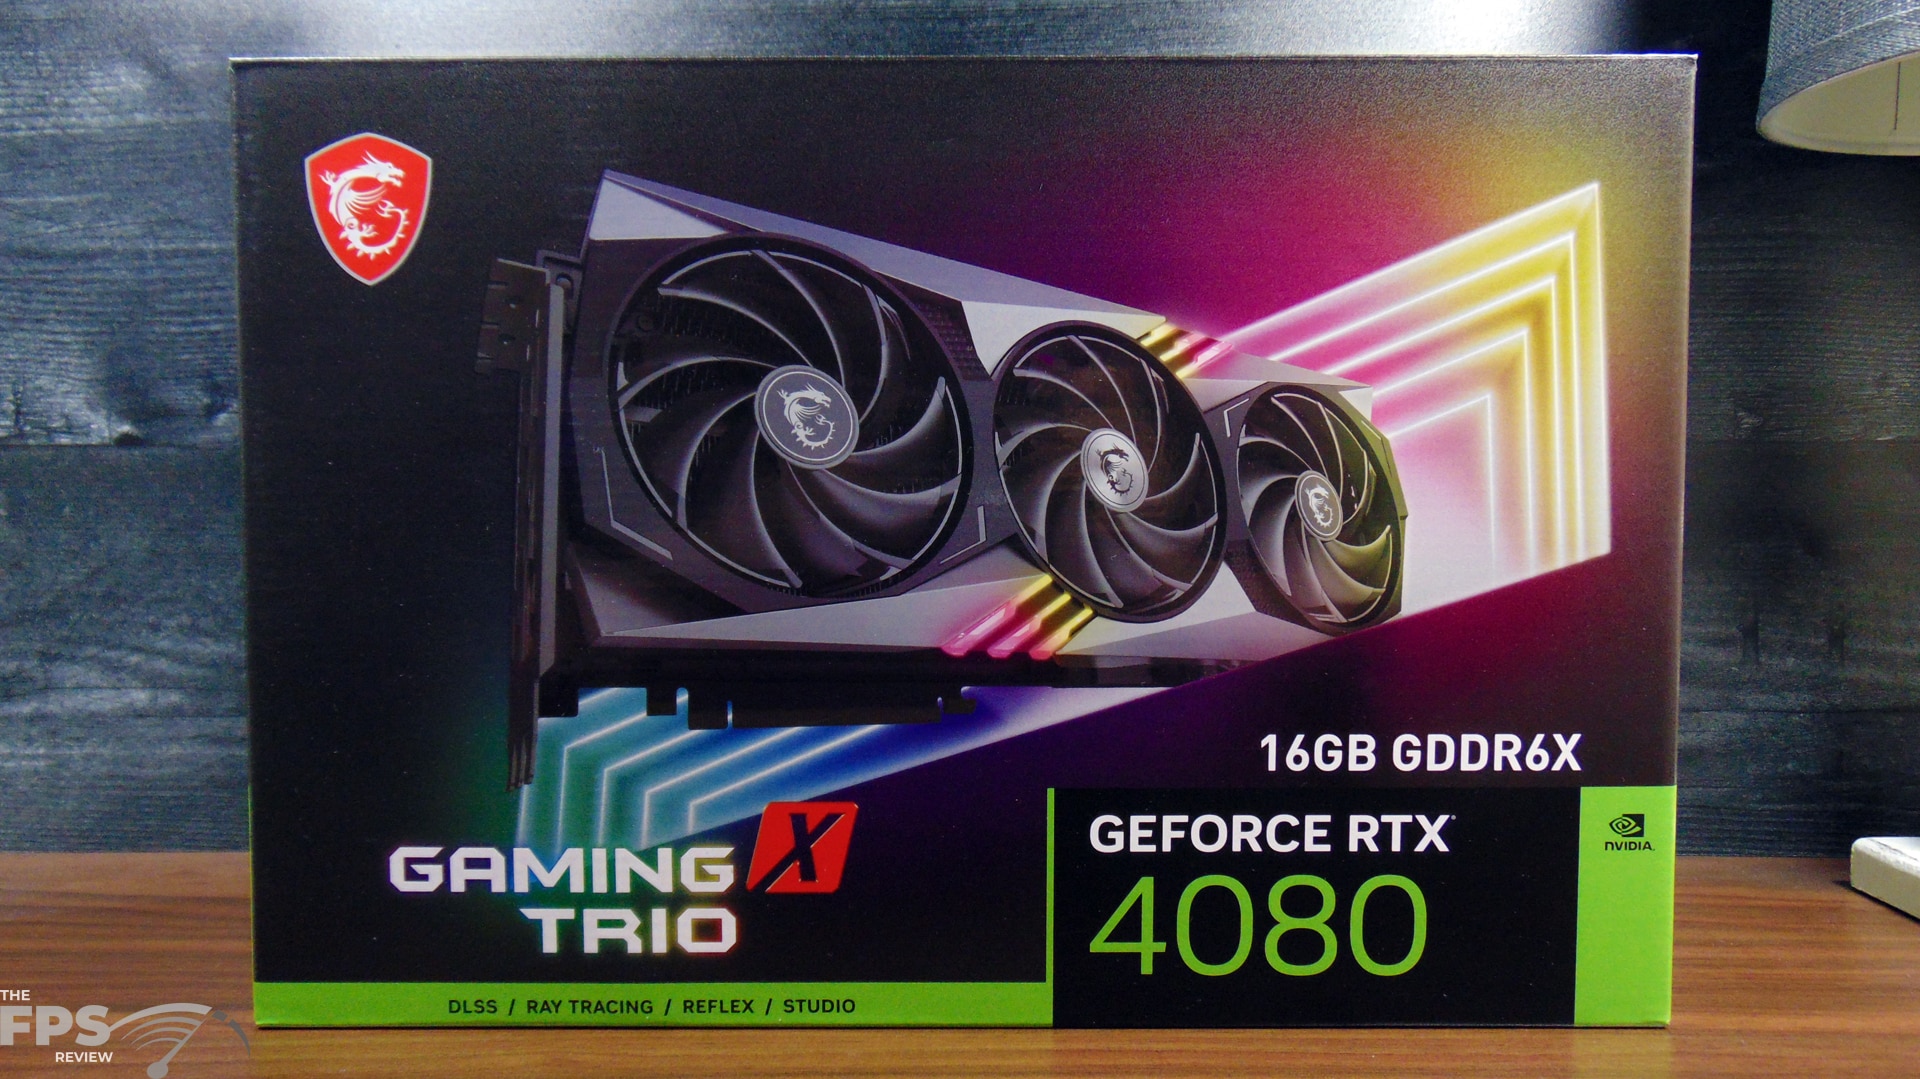 MSI GeForce RTX 4080 16GB GAMING X TRIO Video Card Review - The FPS Review